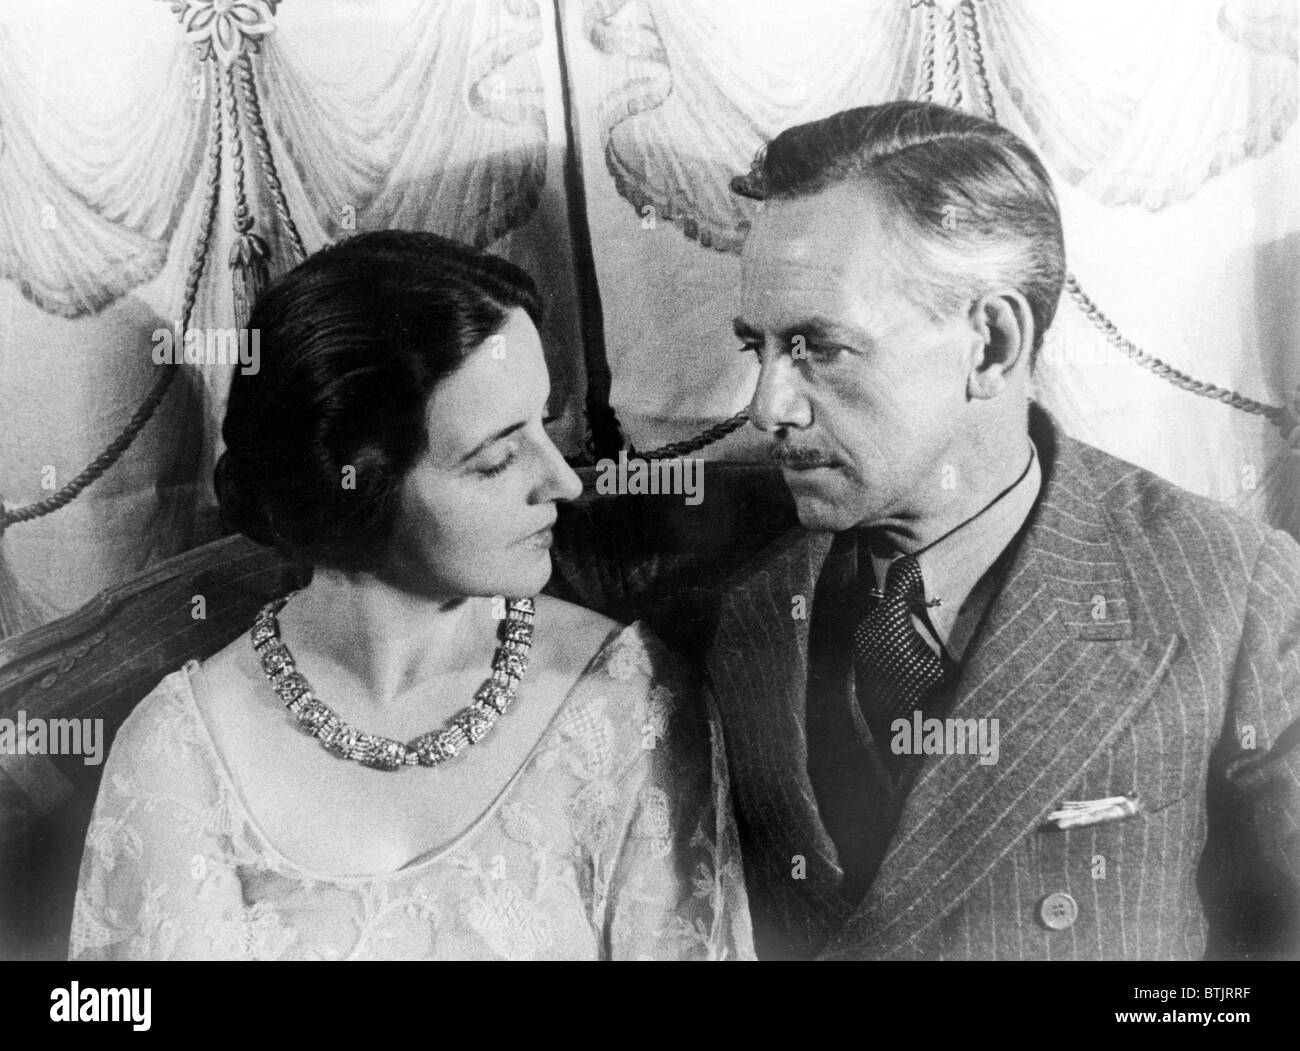 Eugene O'Neill (1888-1953) with his wife Carlotta Monterey O'Neill in a 1933 portrait by Carl Van Vechten. Stock Photo